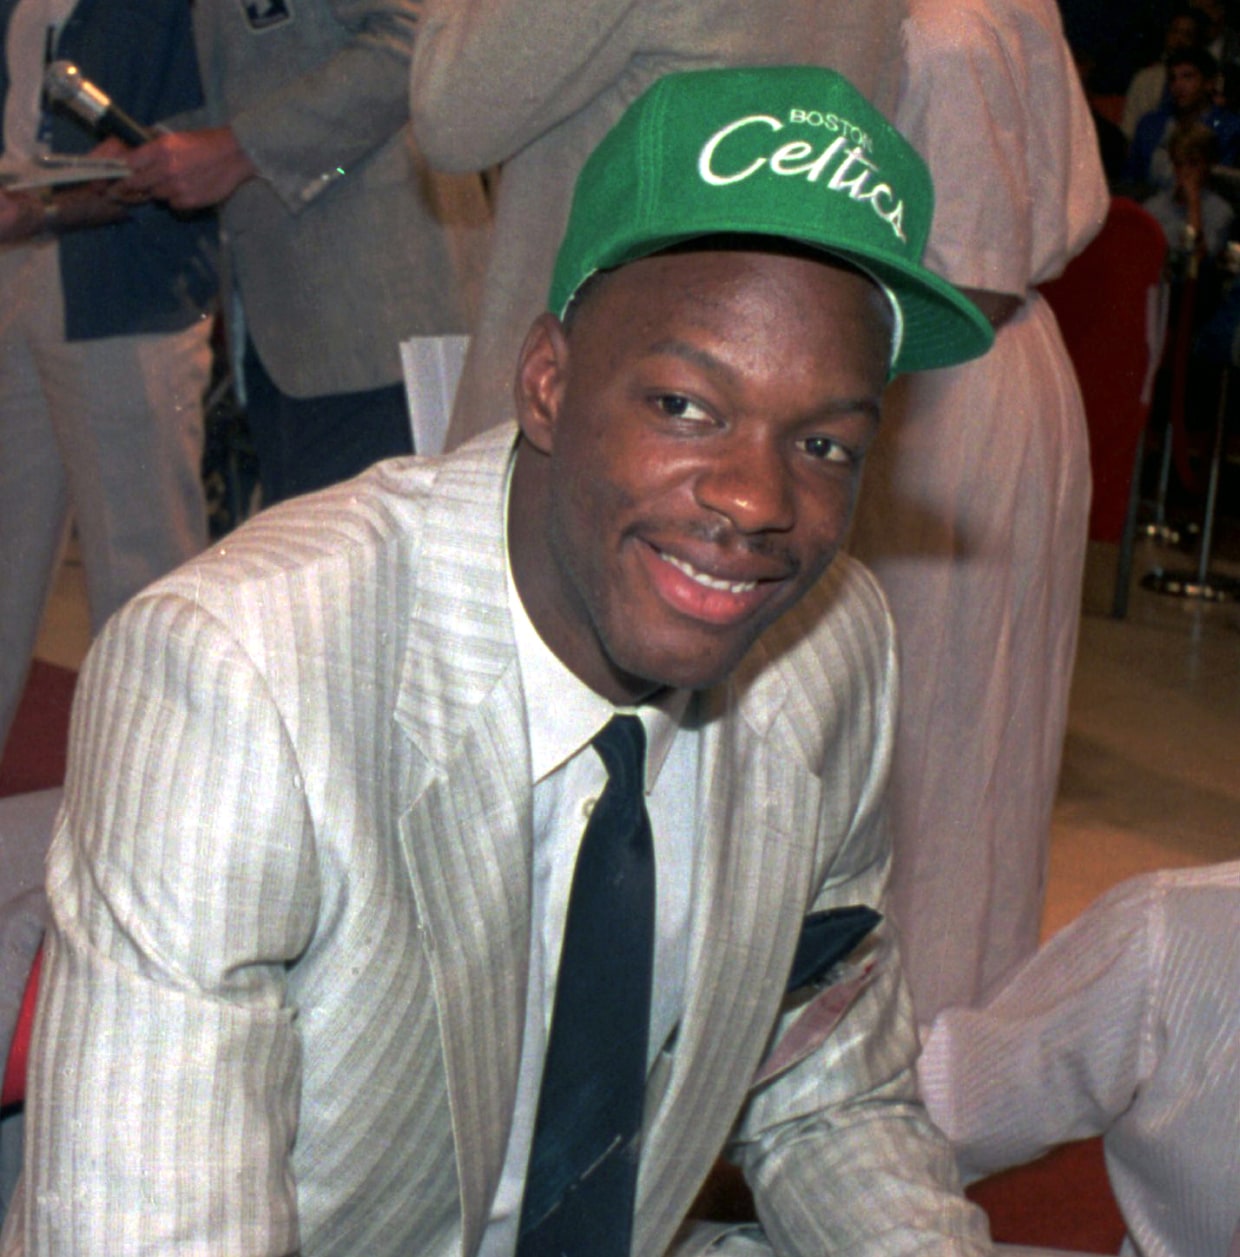 WHAT IF? THE LEN BIAS STORY